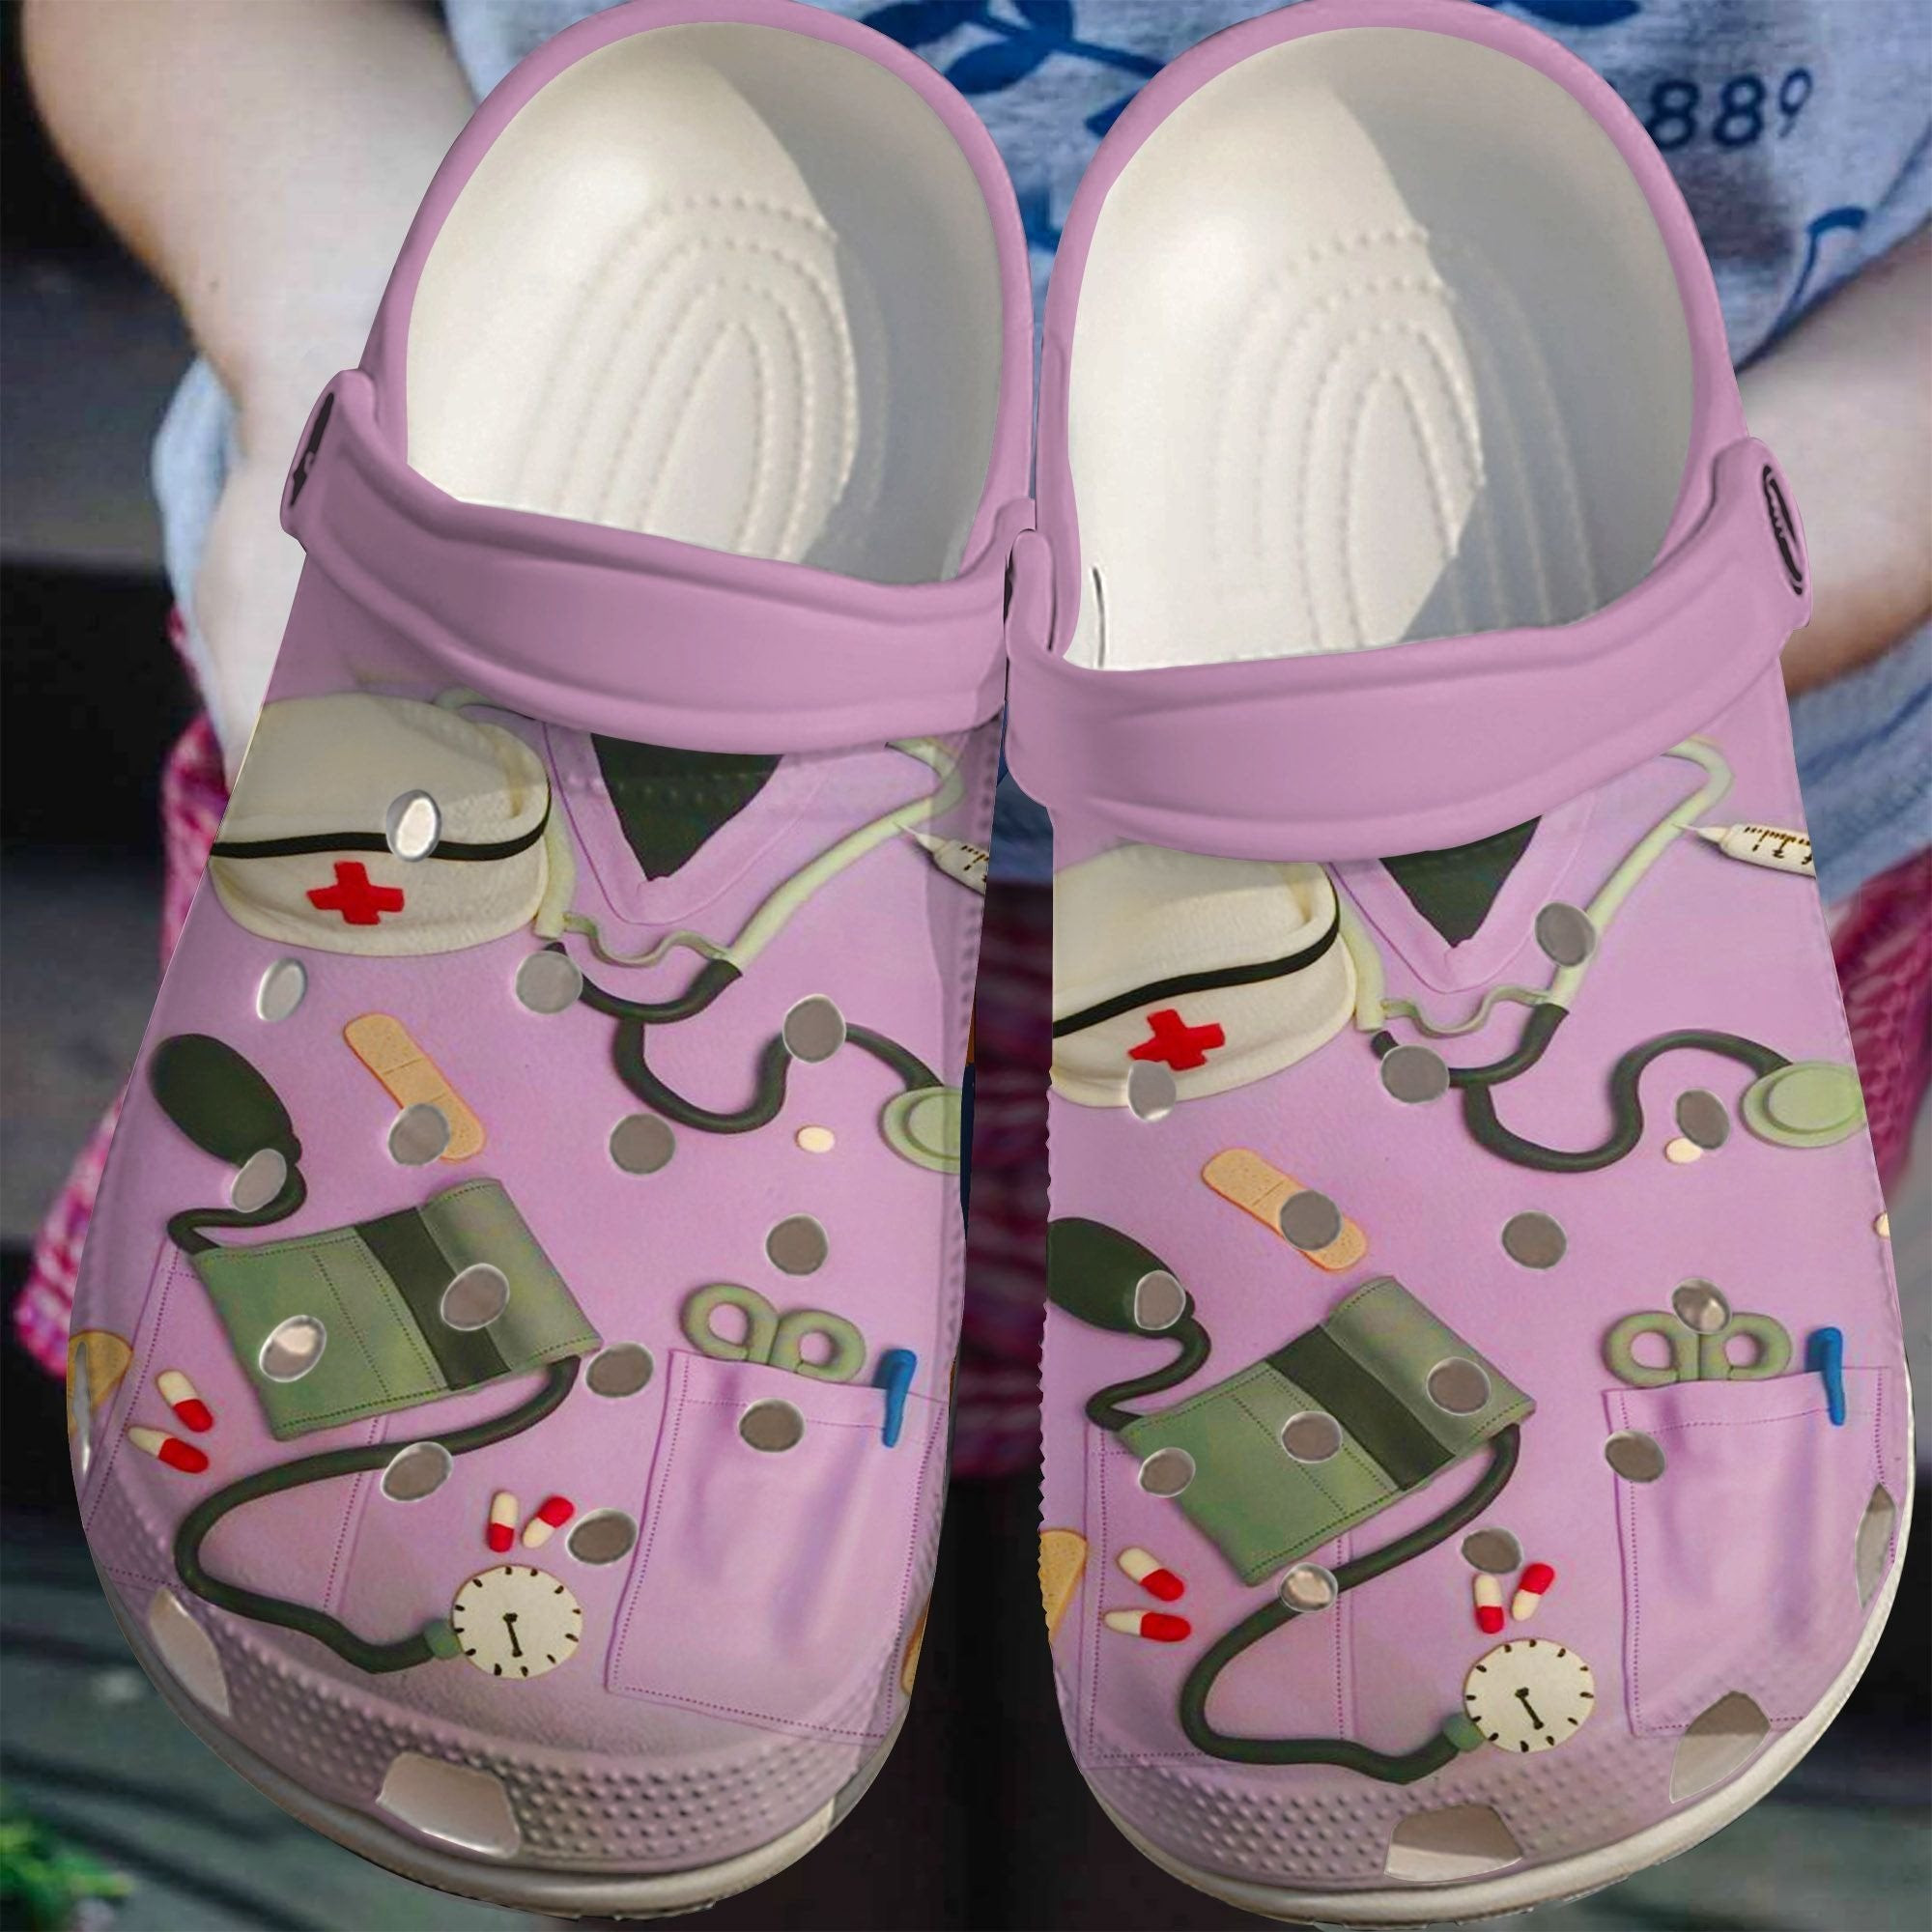 Living The Scrub Life Of Nurse Shoes Crocs Clogs Birthday Gift For Colleague